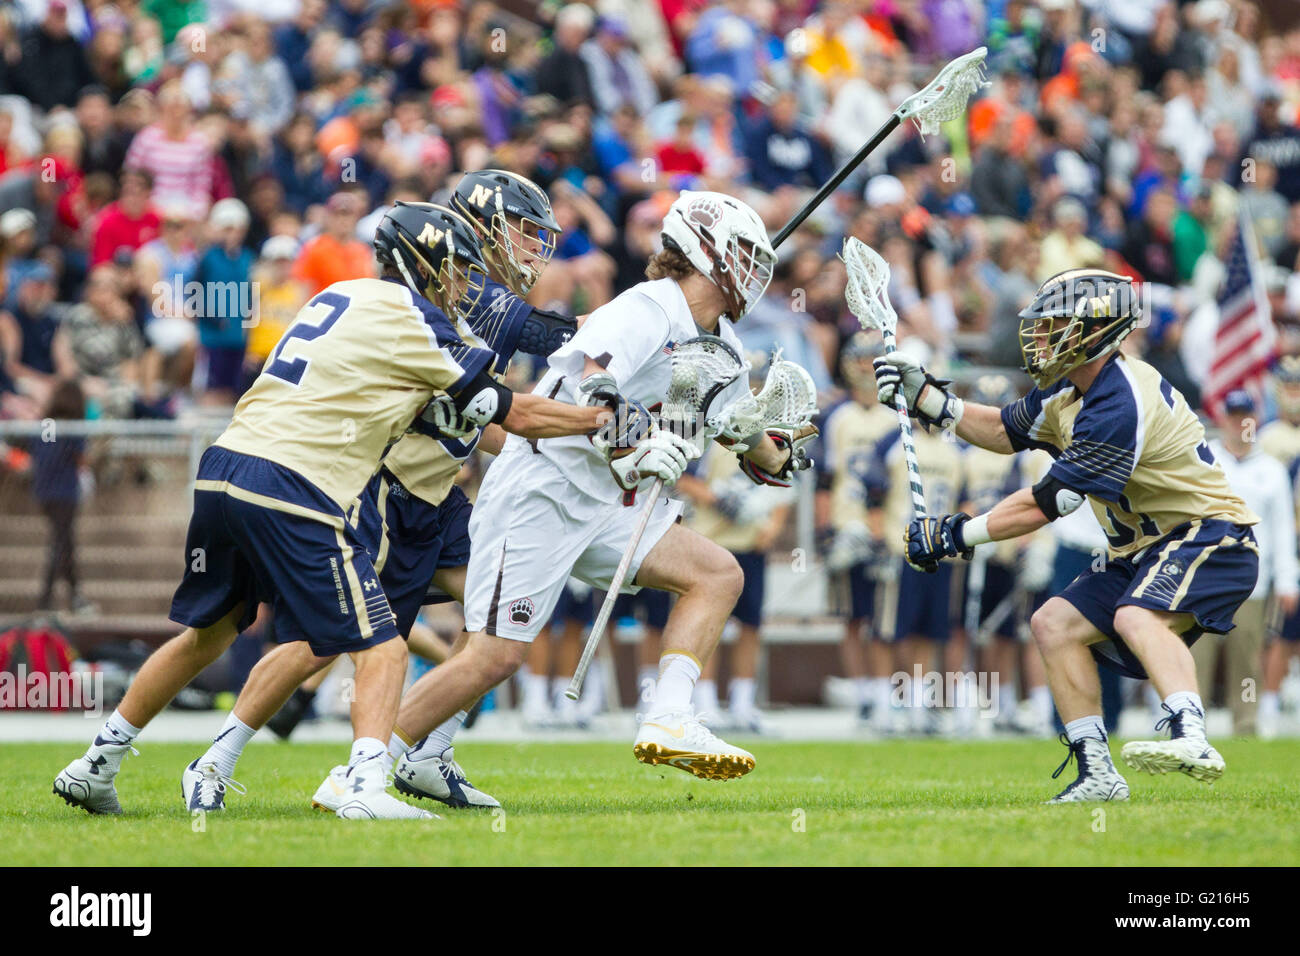 Brown Stadium. 21st May, 2016. RI, USA; Brown Bears midfielder Brendan Caputo (41) surrounded by Navy Midshipmen defenseman Hiram Carter (32), Navy Midshipmen midfielder John Trainor (31) and Navy Midshipmen midfielder DJ Plumer (2) during the first half of an NCAA Division 1 quarterfinal lacrosse game between Navy Midshipmen and Brown Bears at Brown Stadium. Brown defeated Navy 11-10. Anthony Nesmith/Cal Sport Media/Alamy Live News Stock Photo